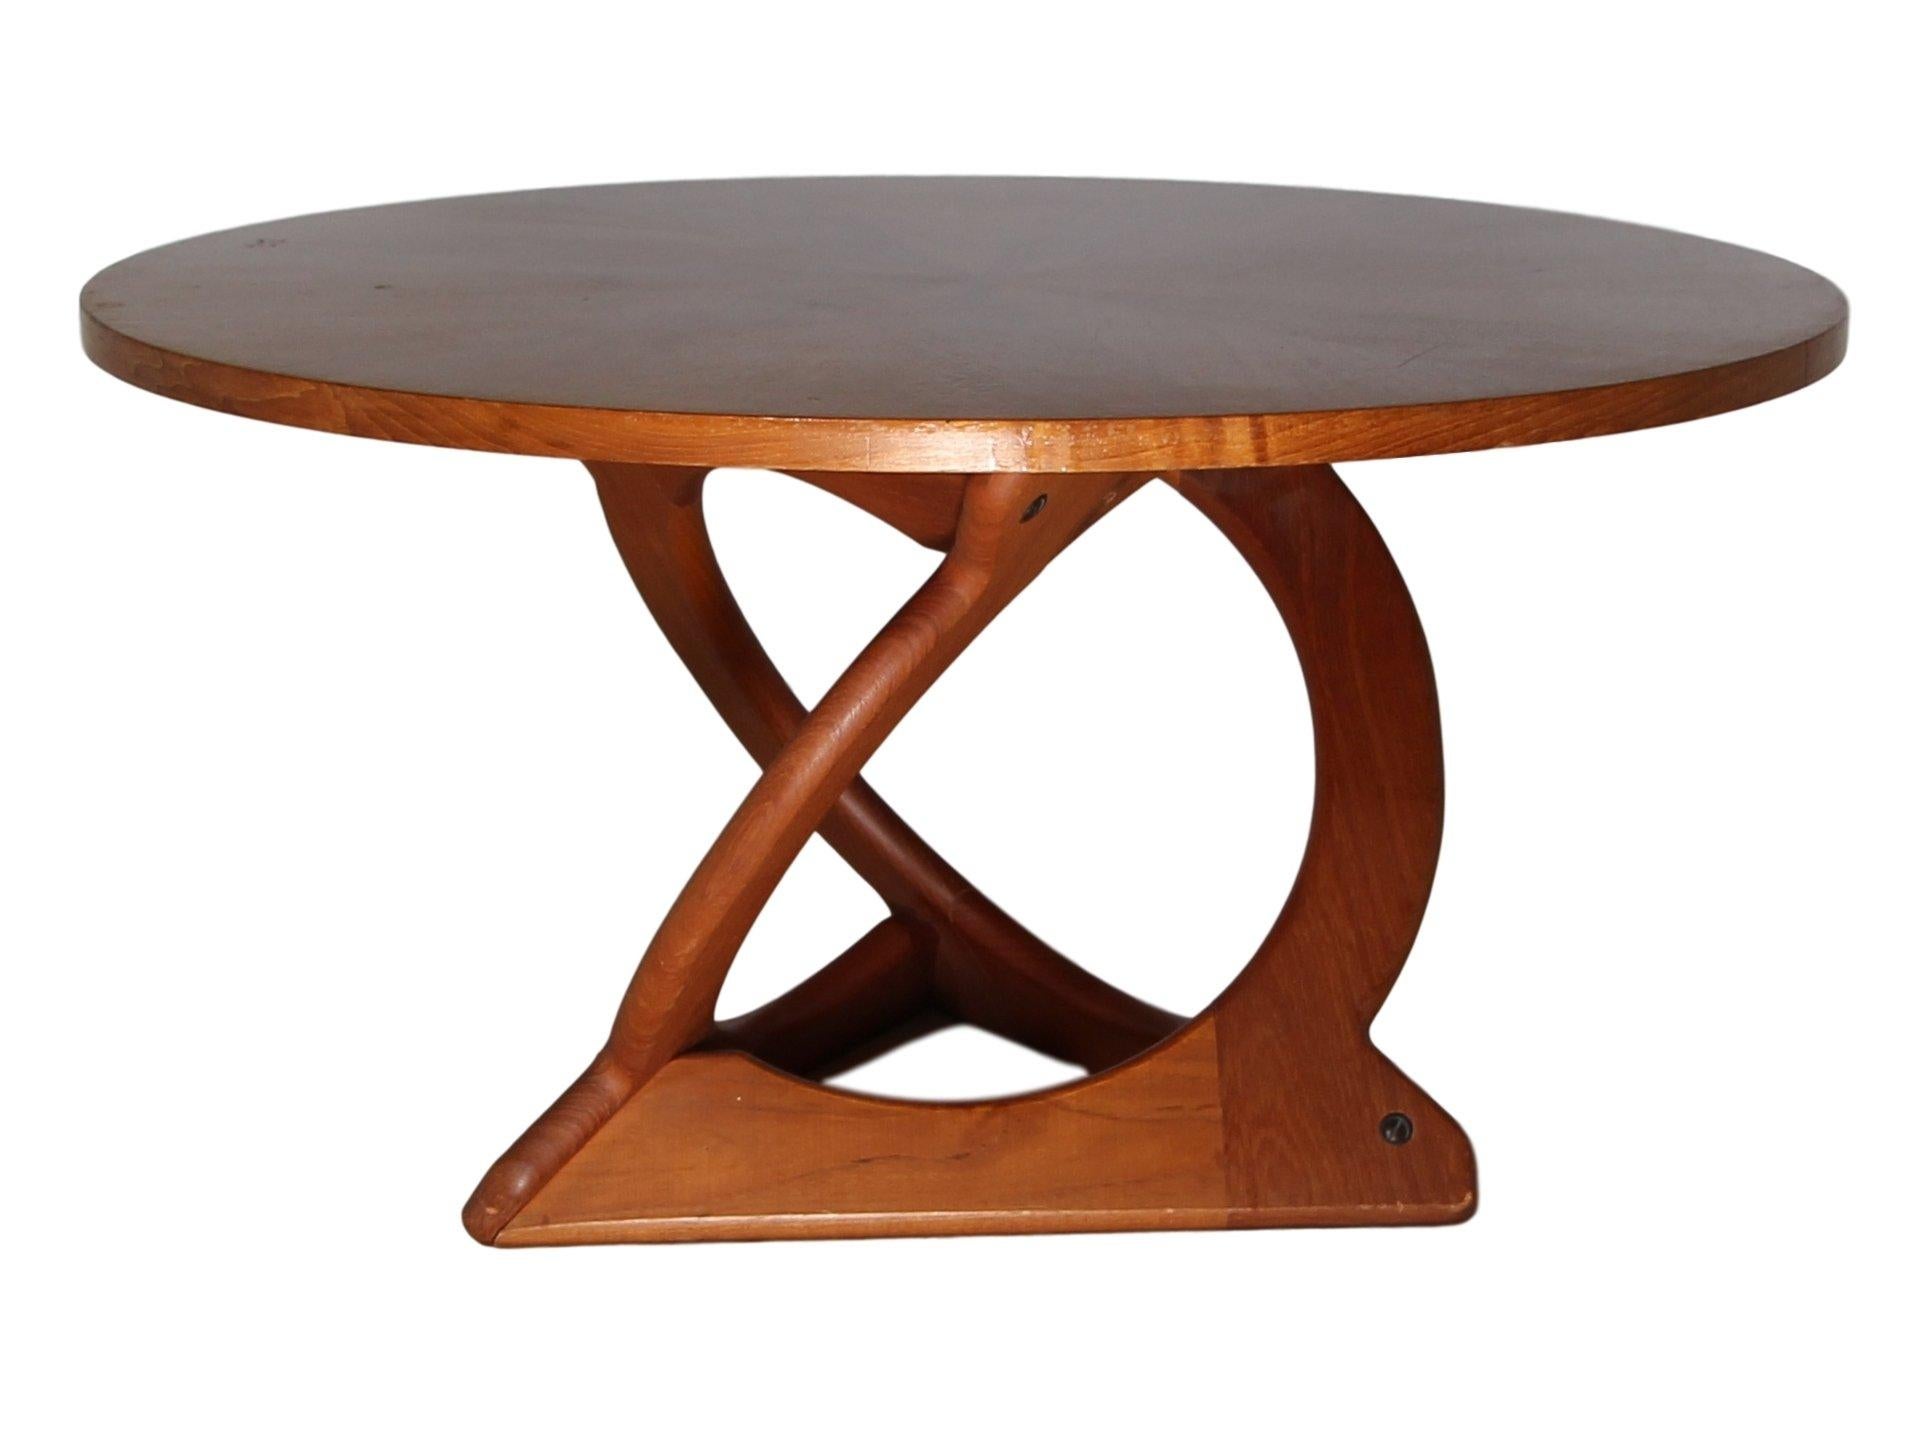 Midcentury teak coffee table. Designed by Danish designer Søren Georg Jensen and made by Kubus. Sculptural solid teak frame and teak veneered top with amazing starburst design. Wonderful table for any midcentury themed home, office or lobby.

Very